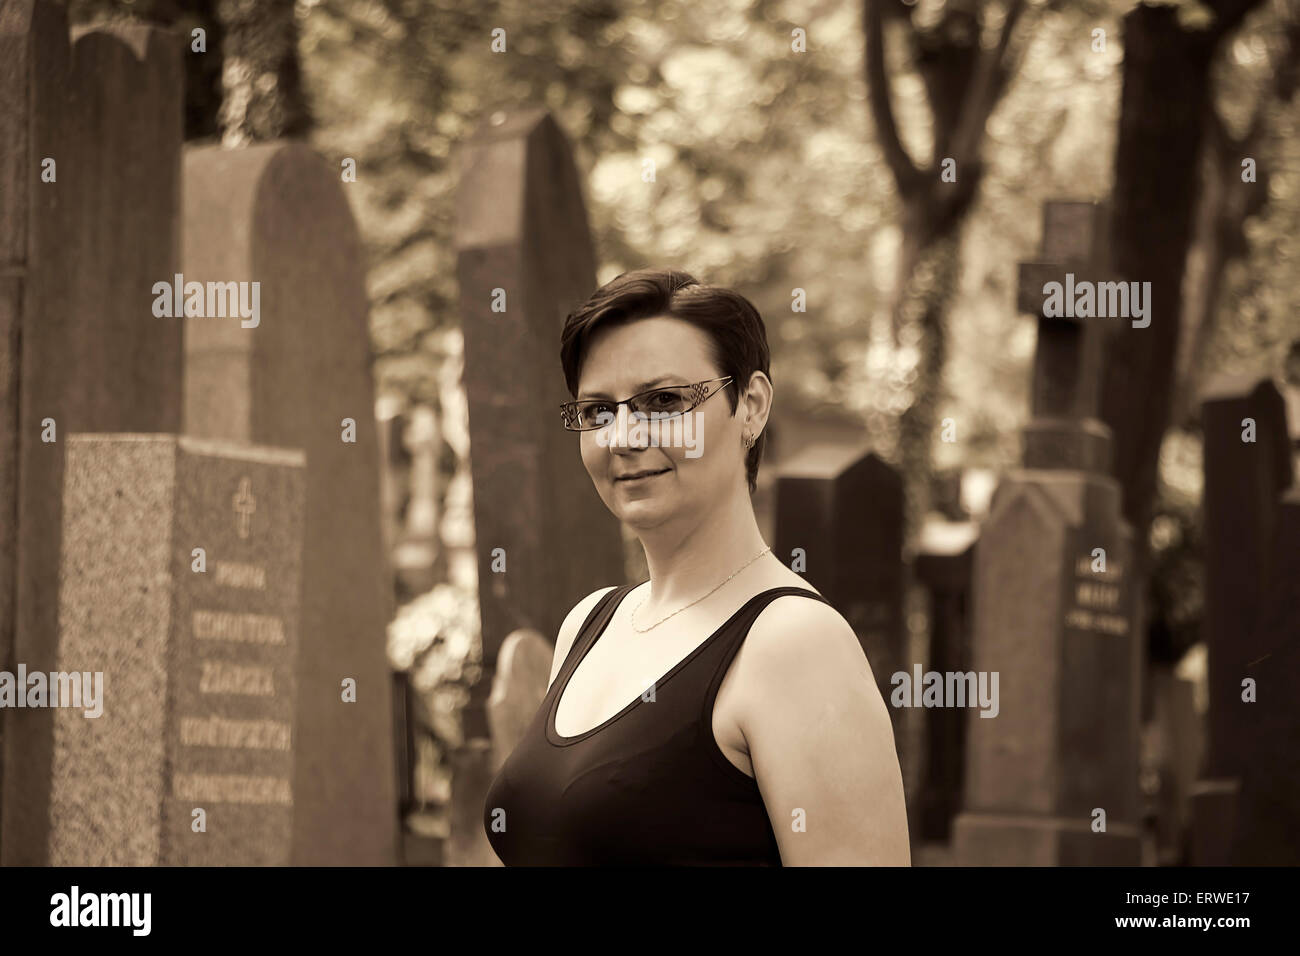 Portrait of young woman in a cemetery. Black and white vintage look, melancholy mood. Stock Photo